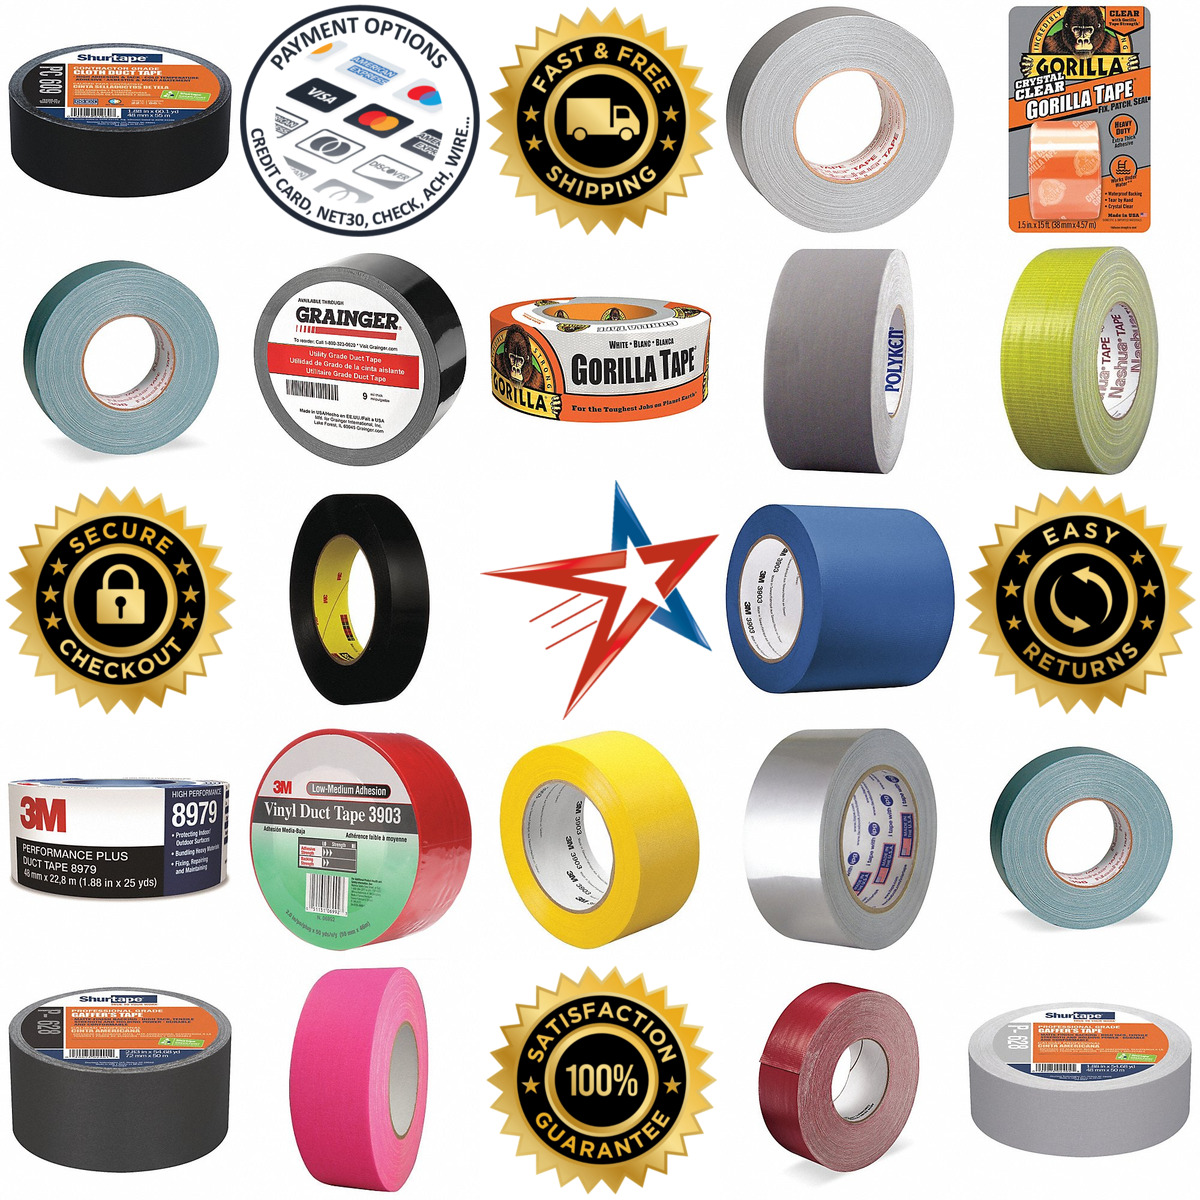 A selection of Duct Tape products on GoVets